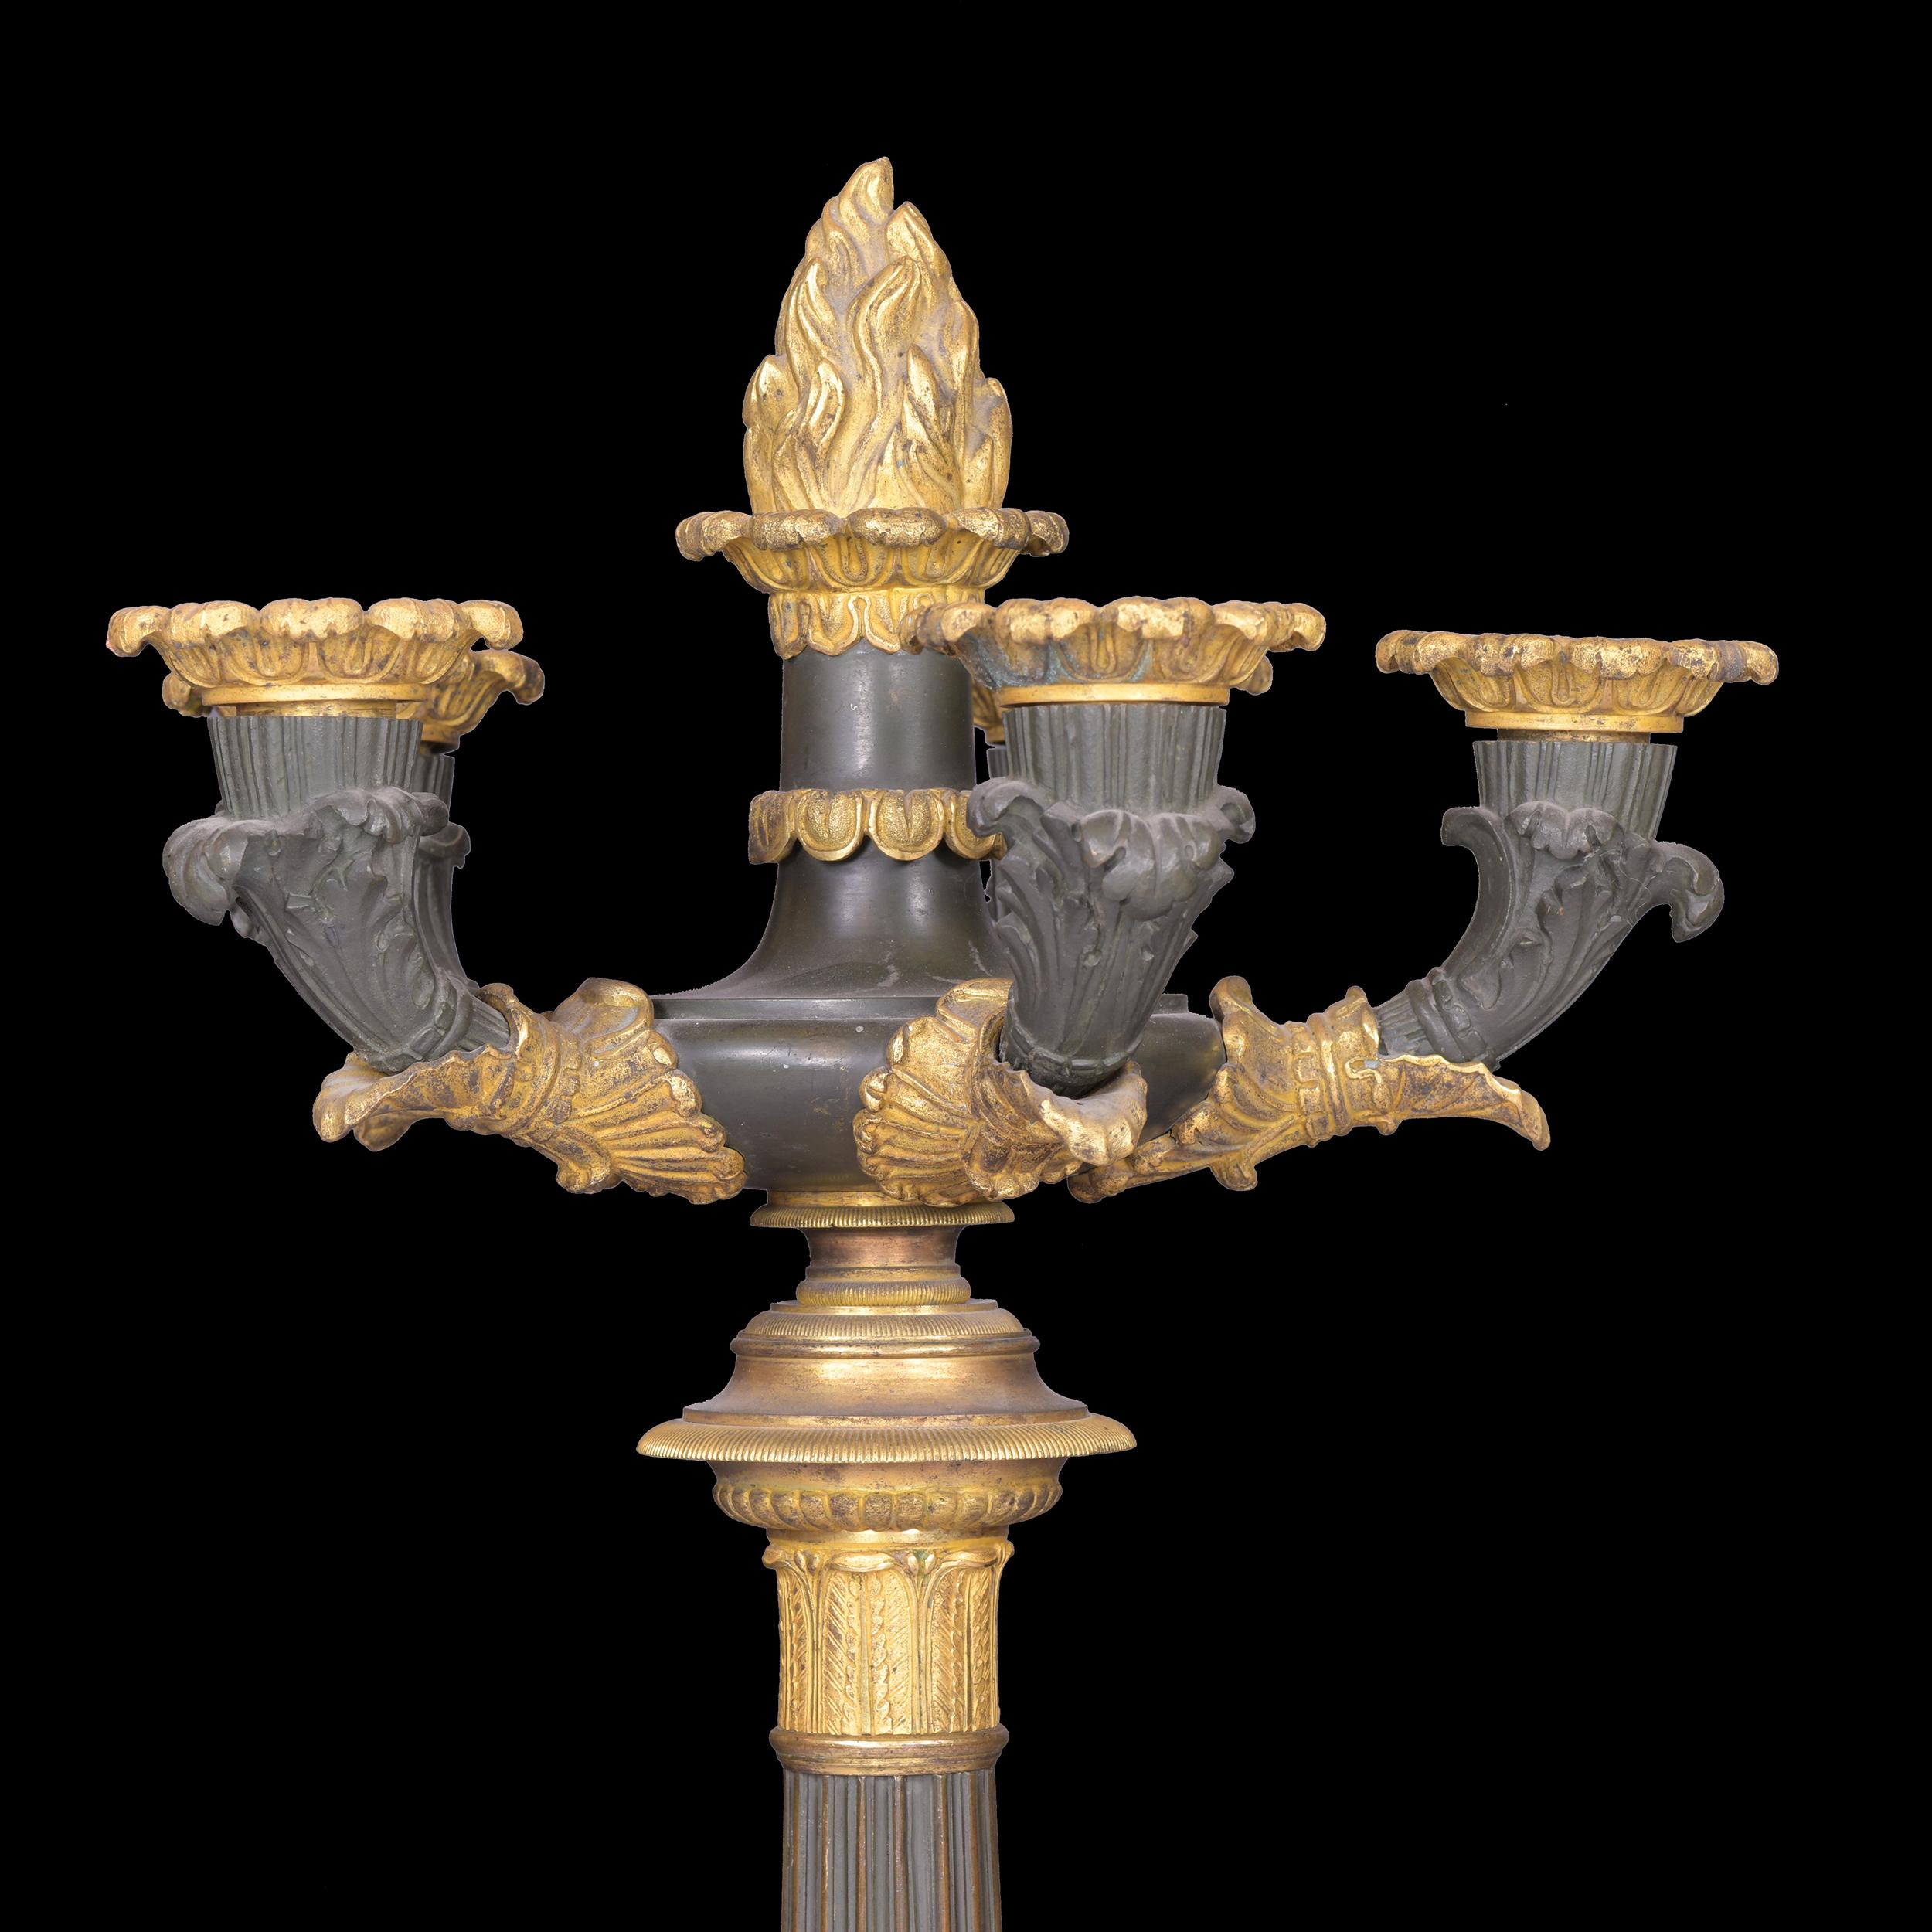 Regency Pair of 19th Century French Bronze and Ormolu Candelabra For Sale